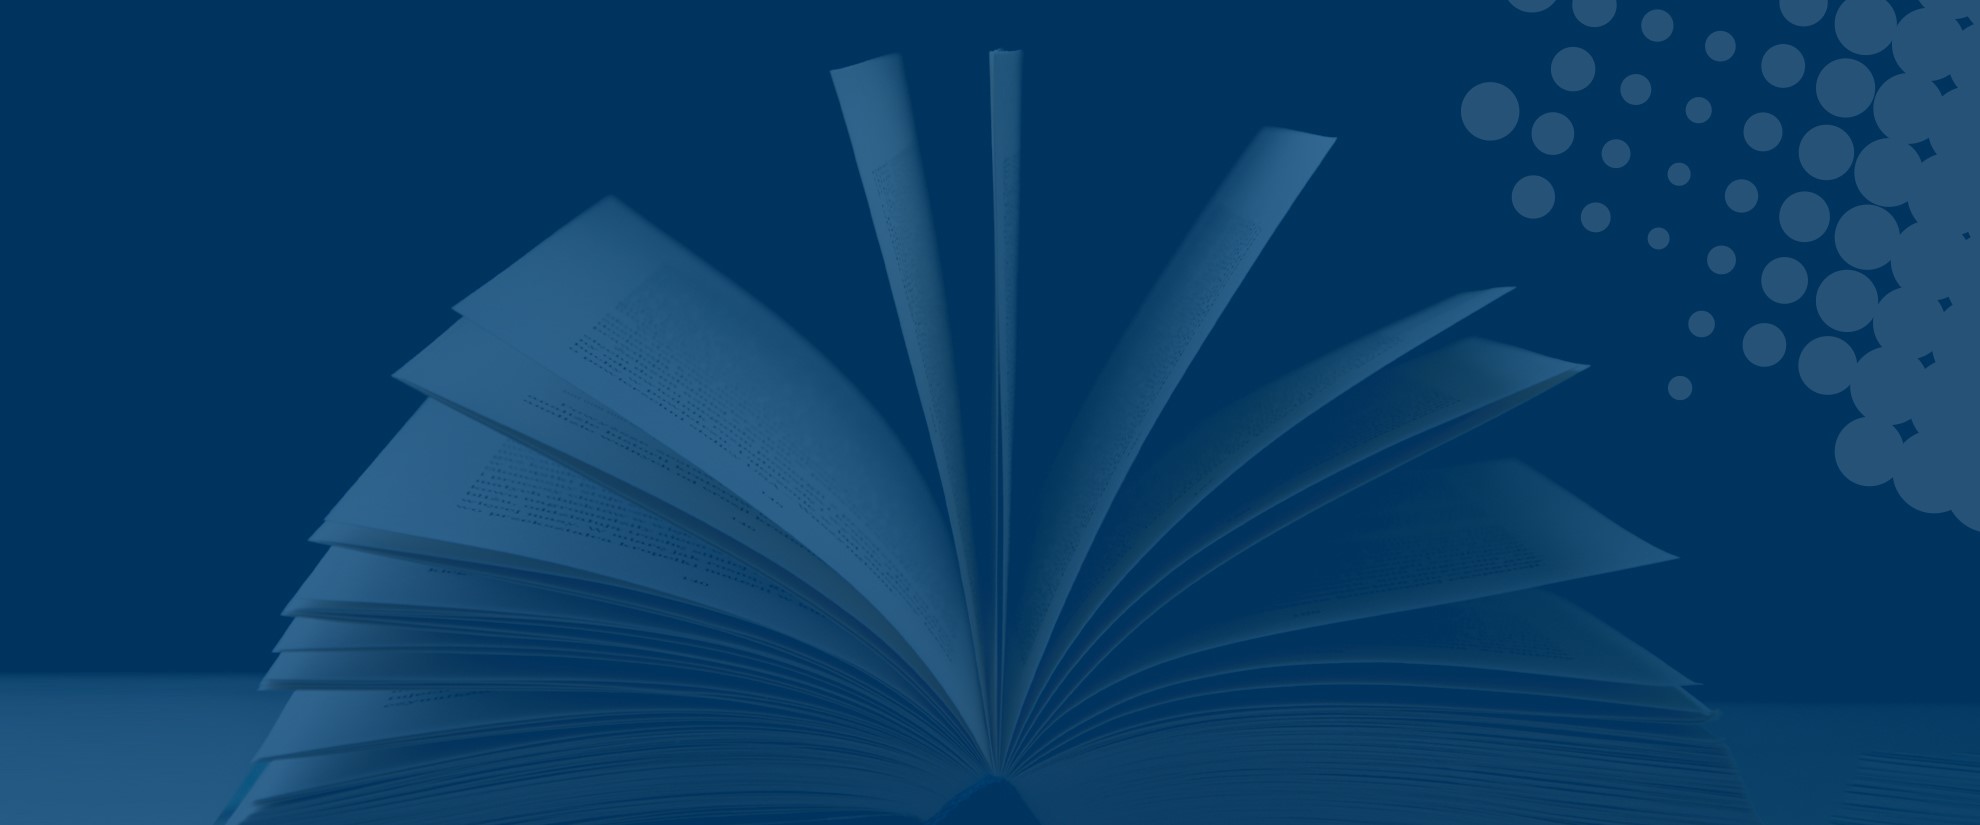 book held open to show individual leafs on blue background